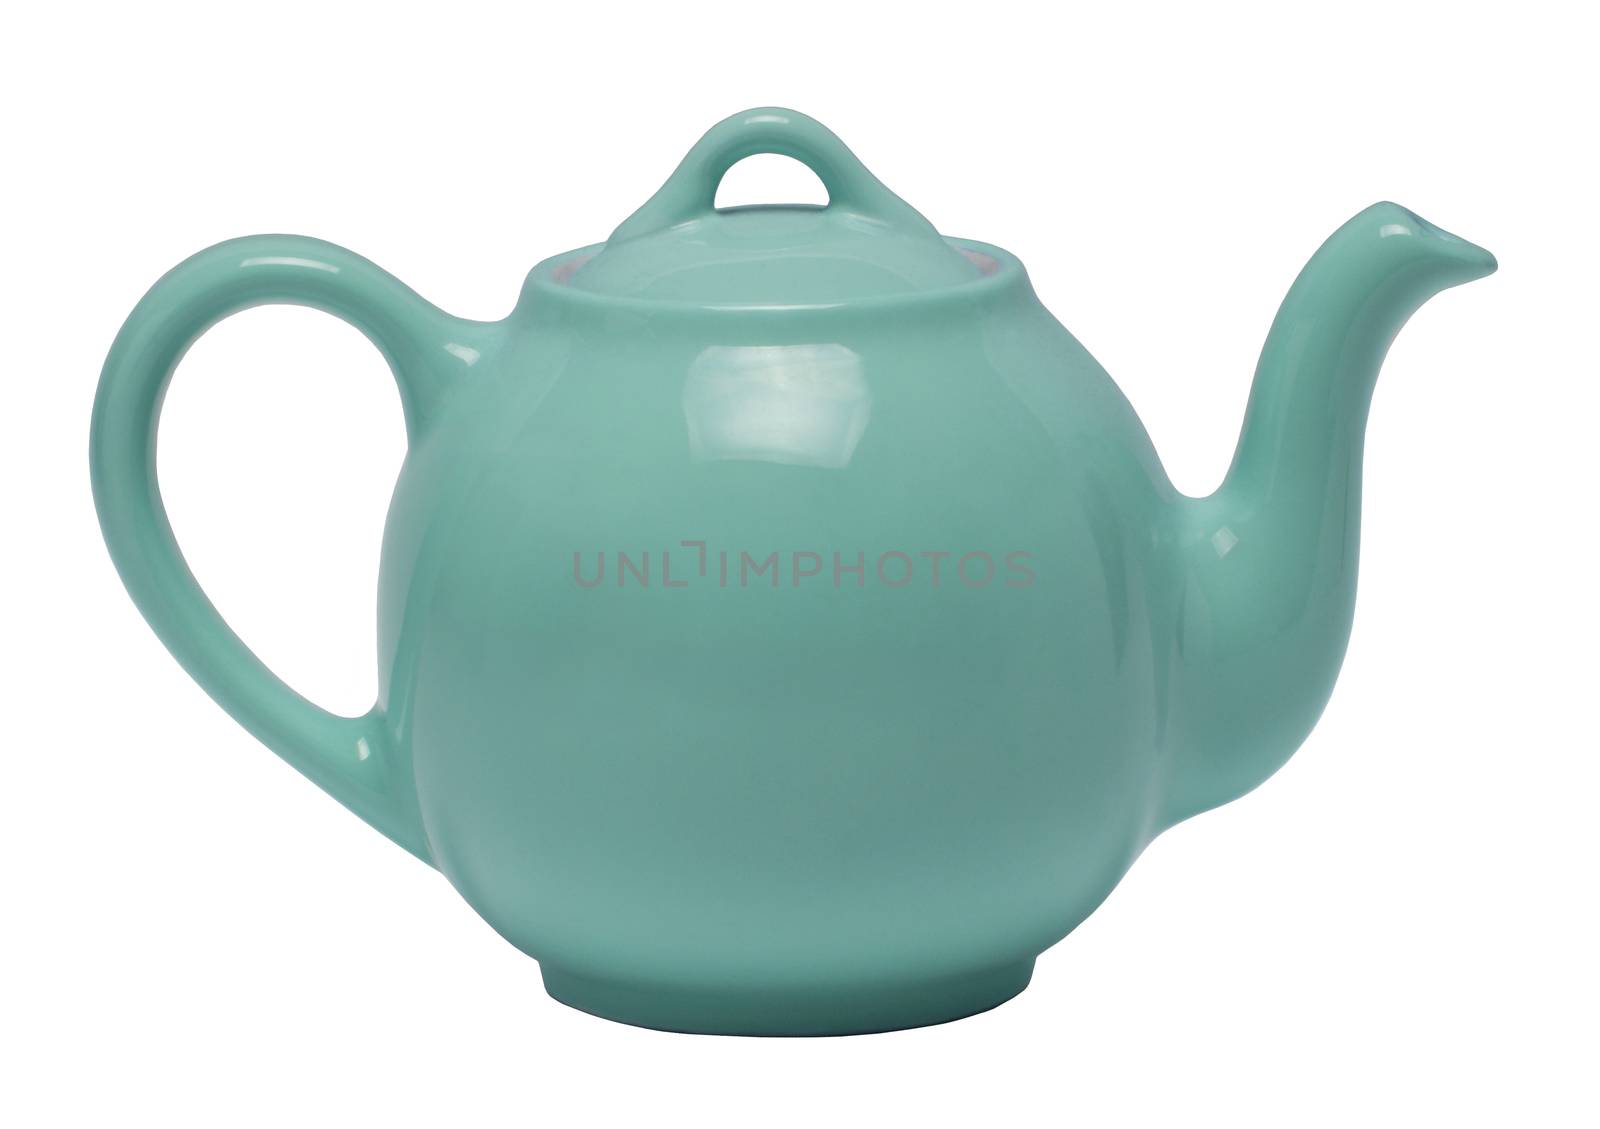 Teal Teapot Against White Background by Balefire9